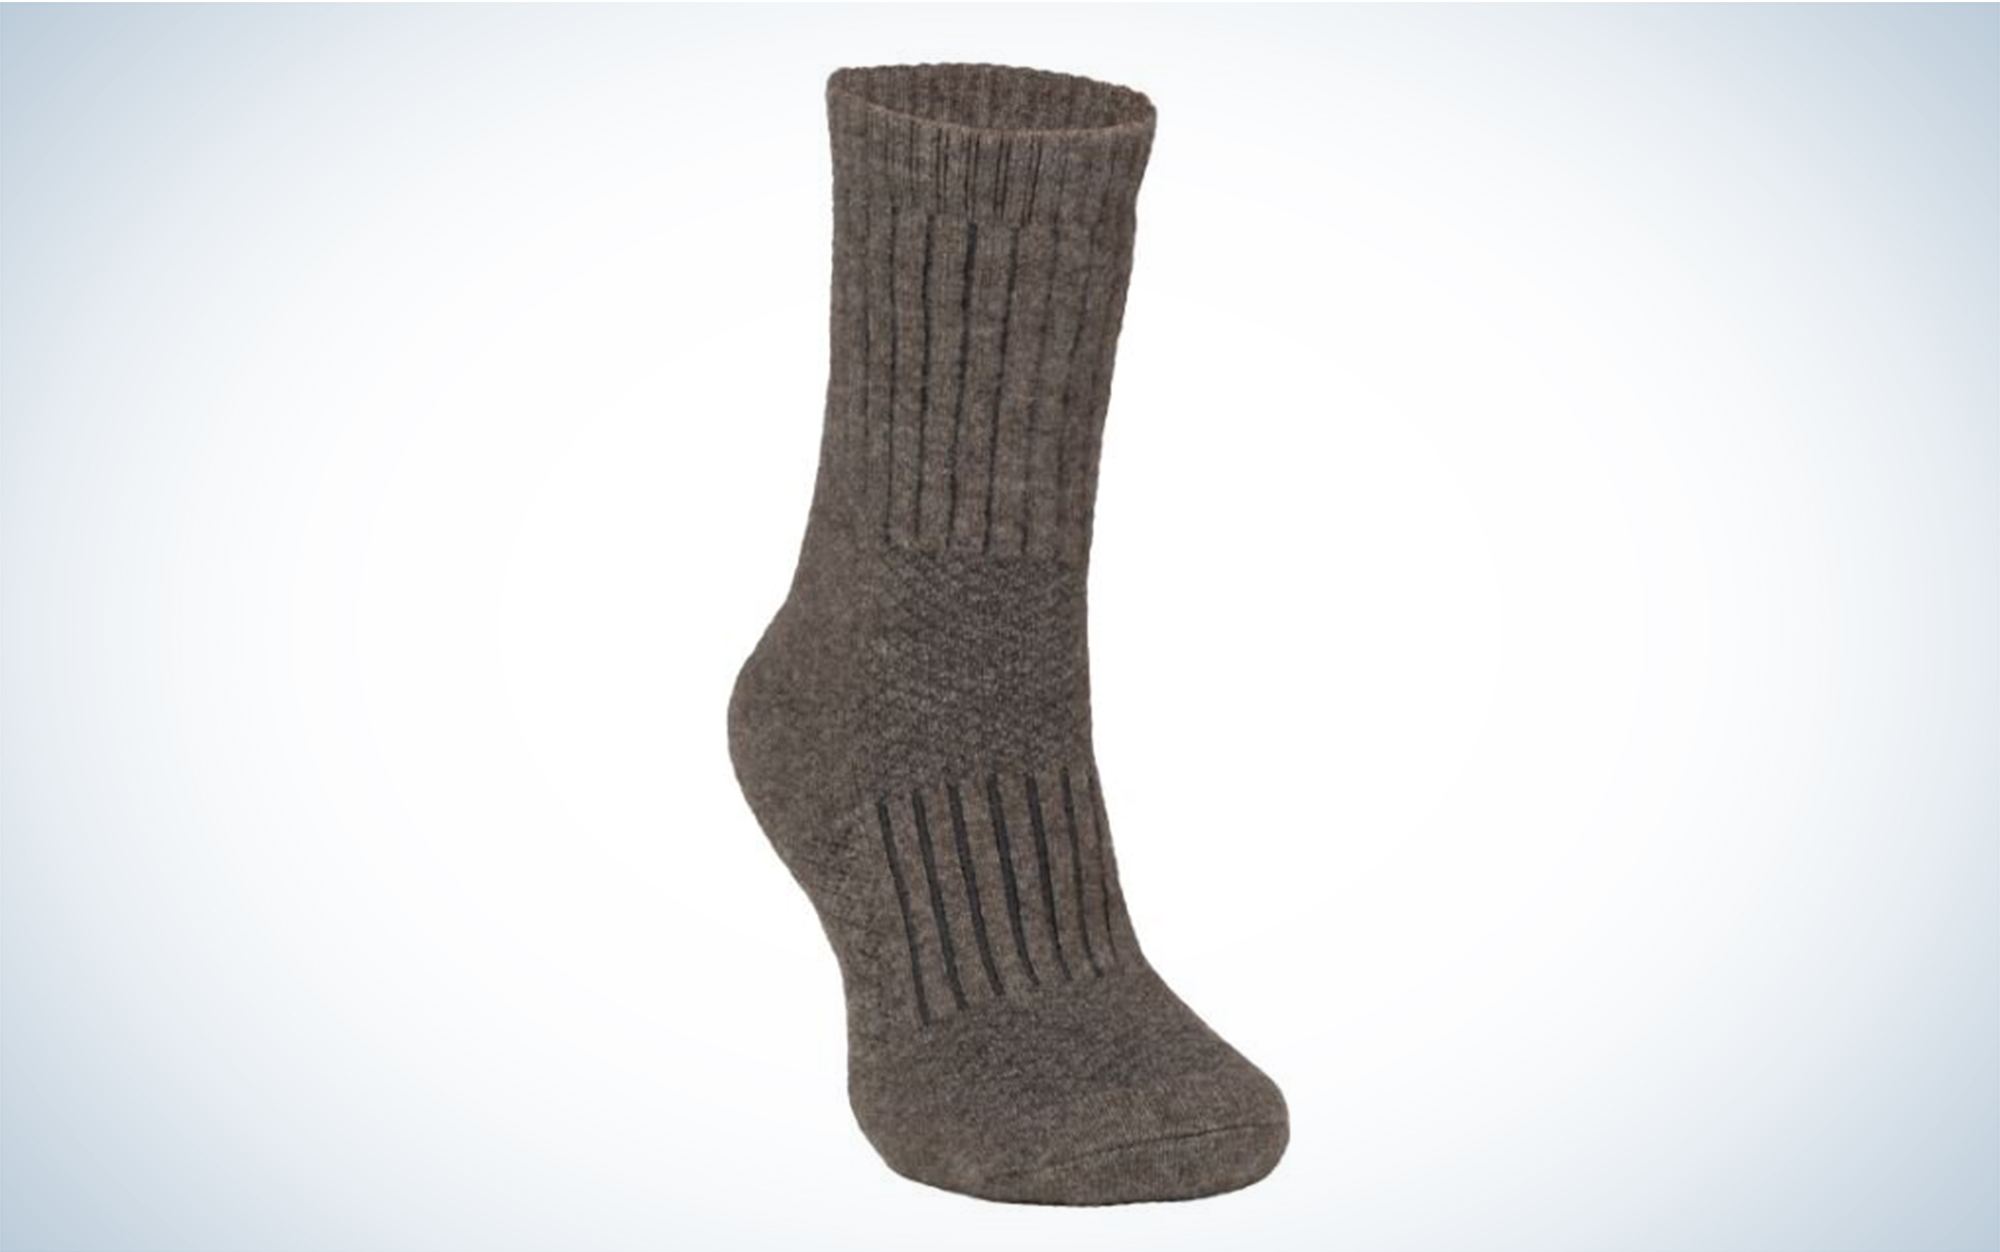 The purist sock is the best indulgence gift.